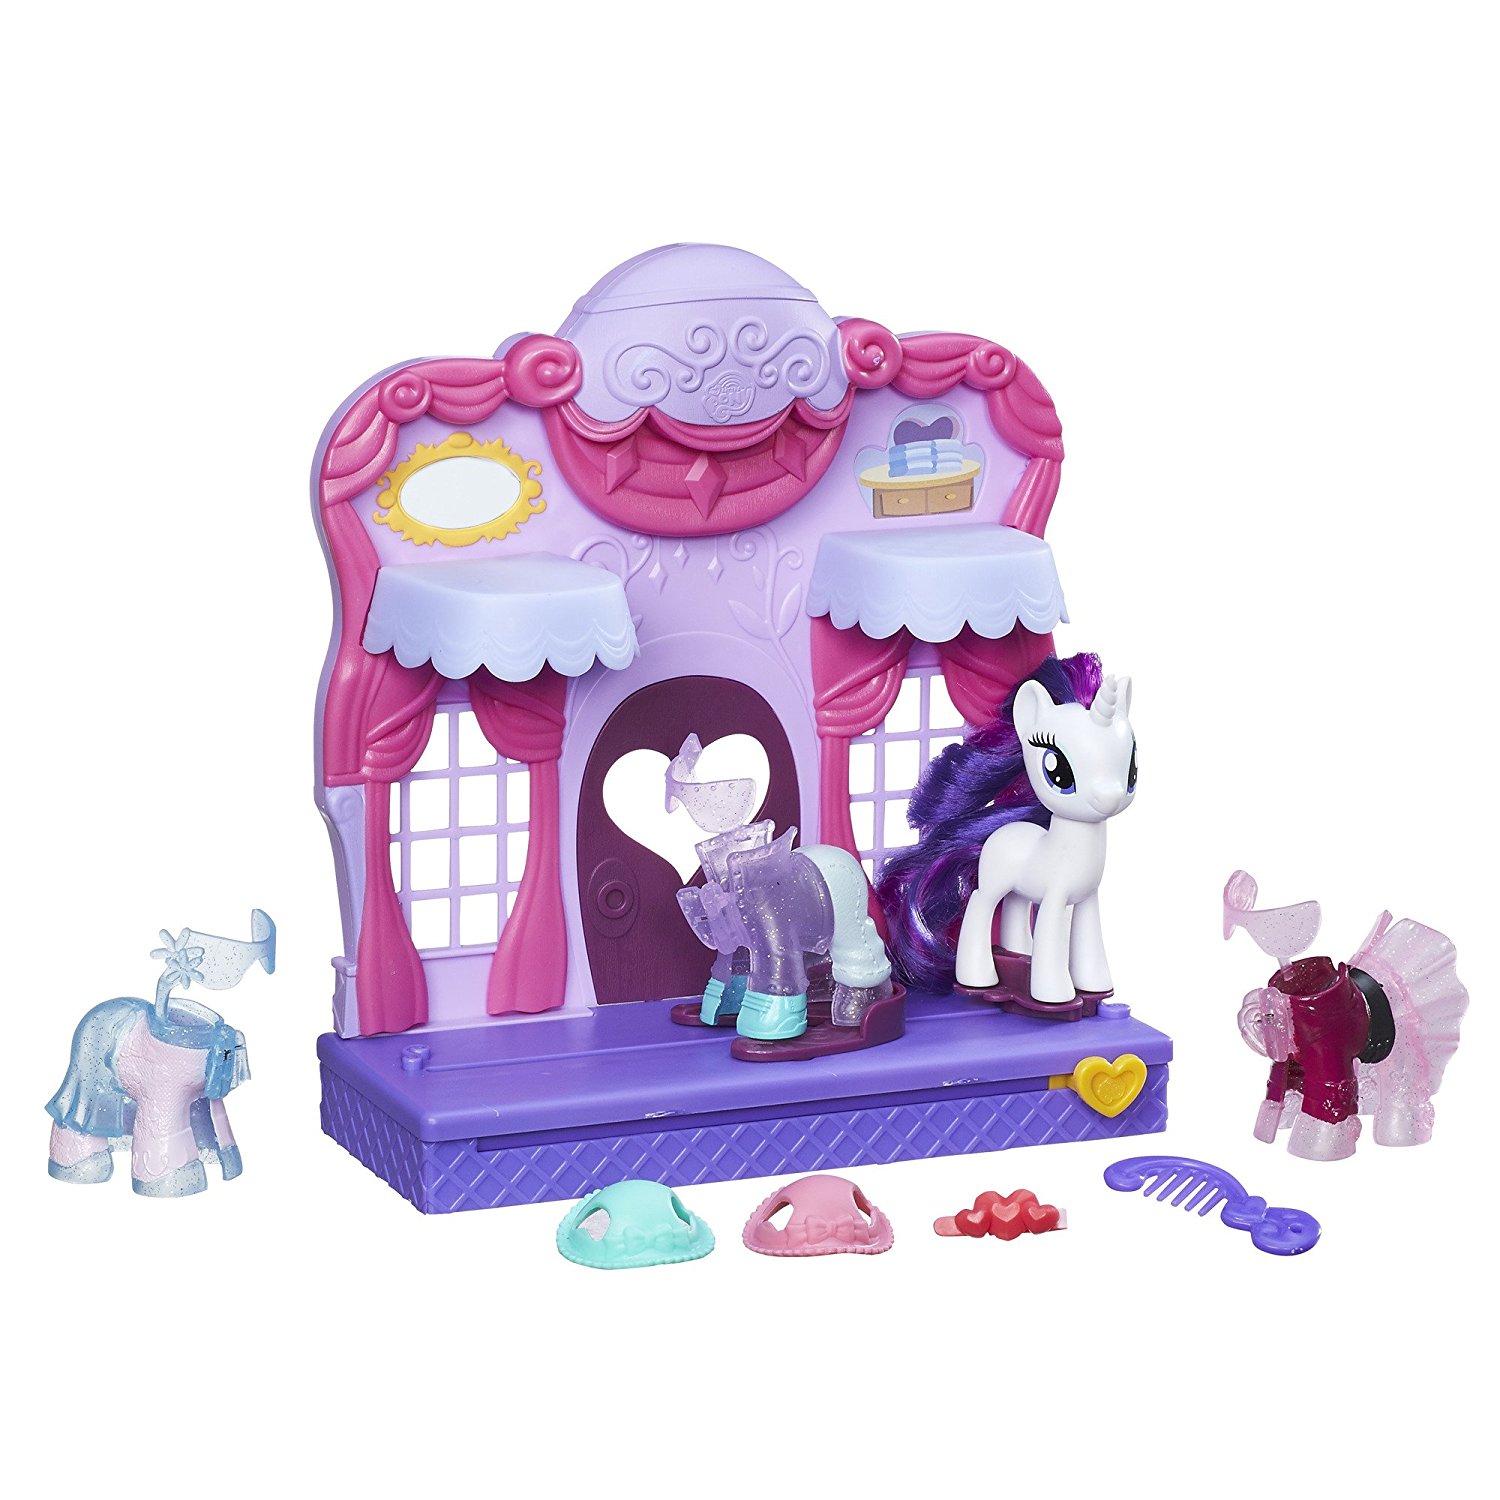 My Little Pony Friendship is Magic Rarity Fashion Runway Playset ONLY $7.00!